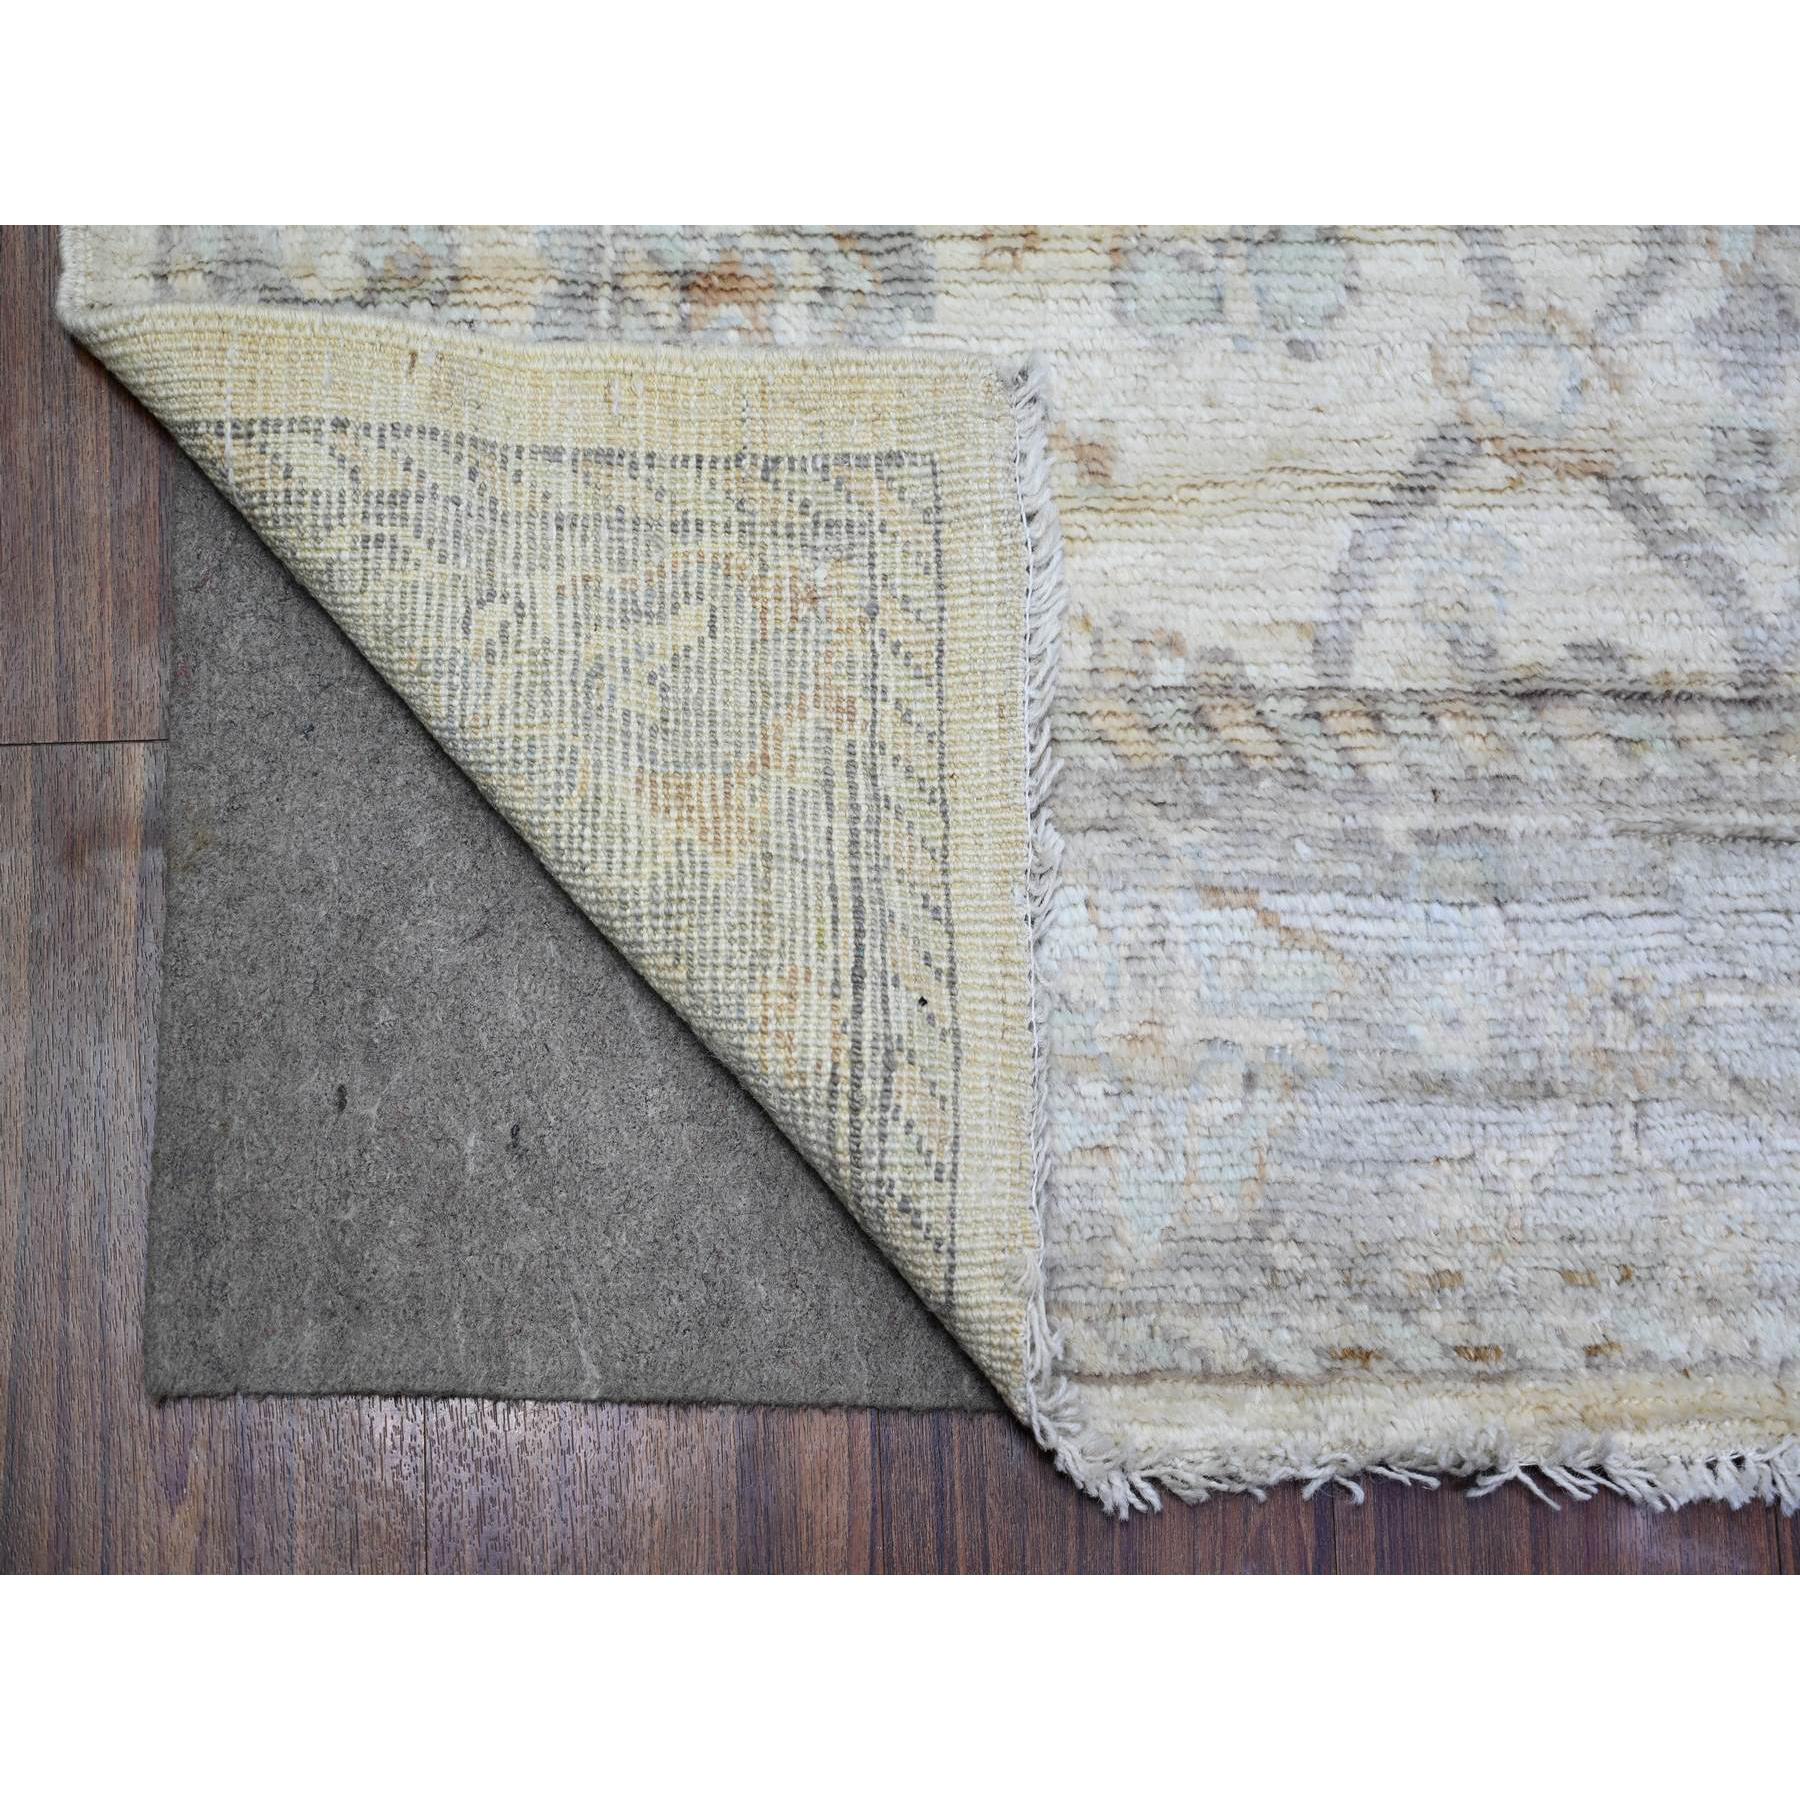 4'x6'1" Ivory, Hand Woven Afghan Angora Oushak with All Over Design, Vegetable Dyes Organic Wool, Oriental Rug 